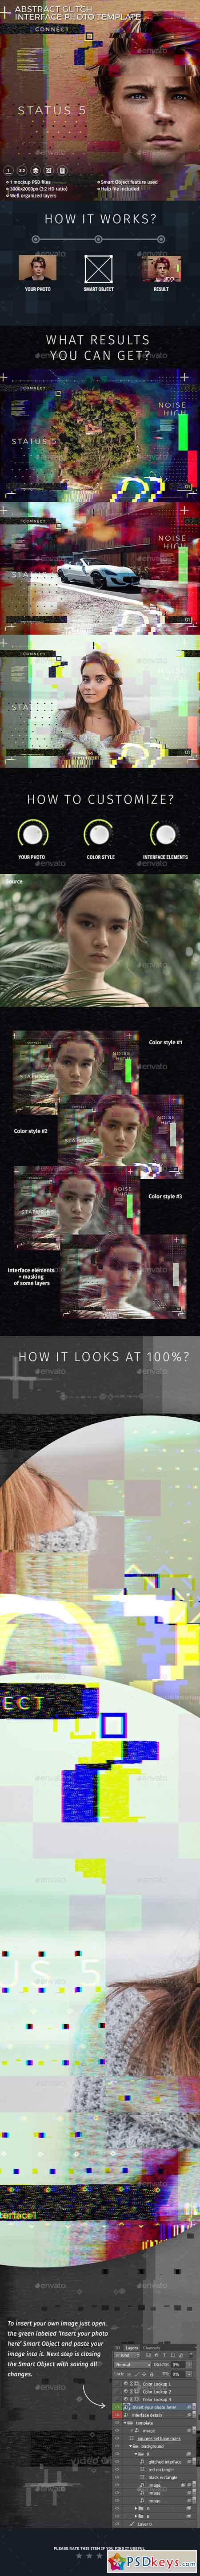 Abstract Glitch Photo Interface Template 22742649